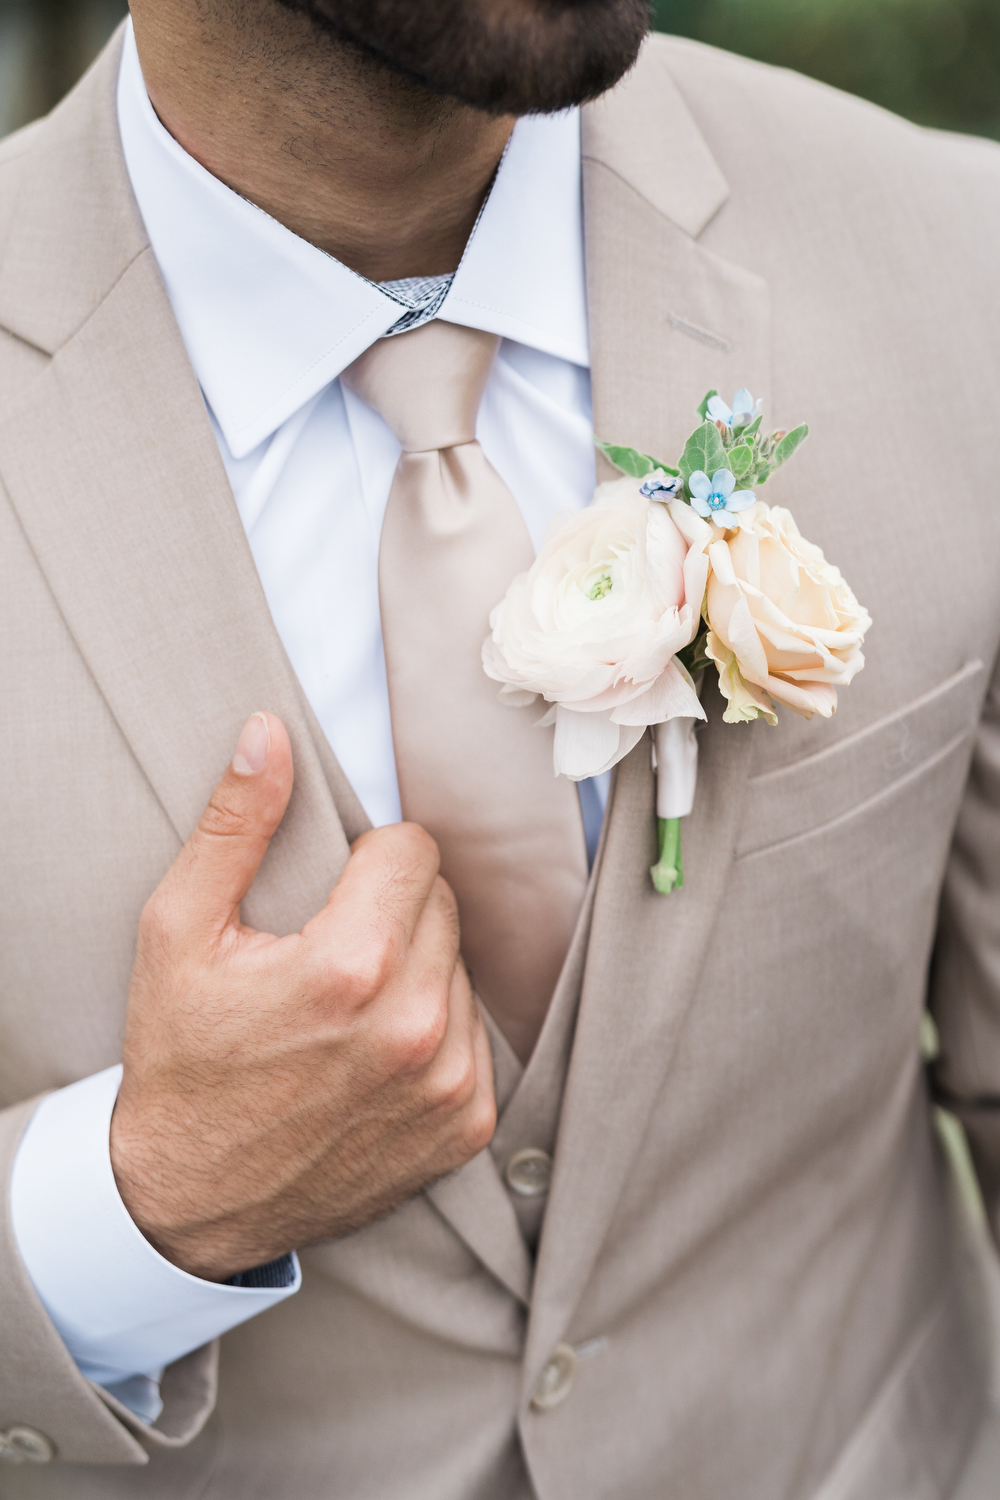 Close-up view of a tailored tan wedding suit fitting